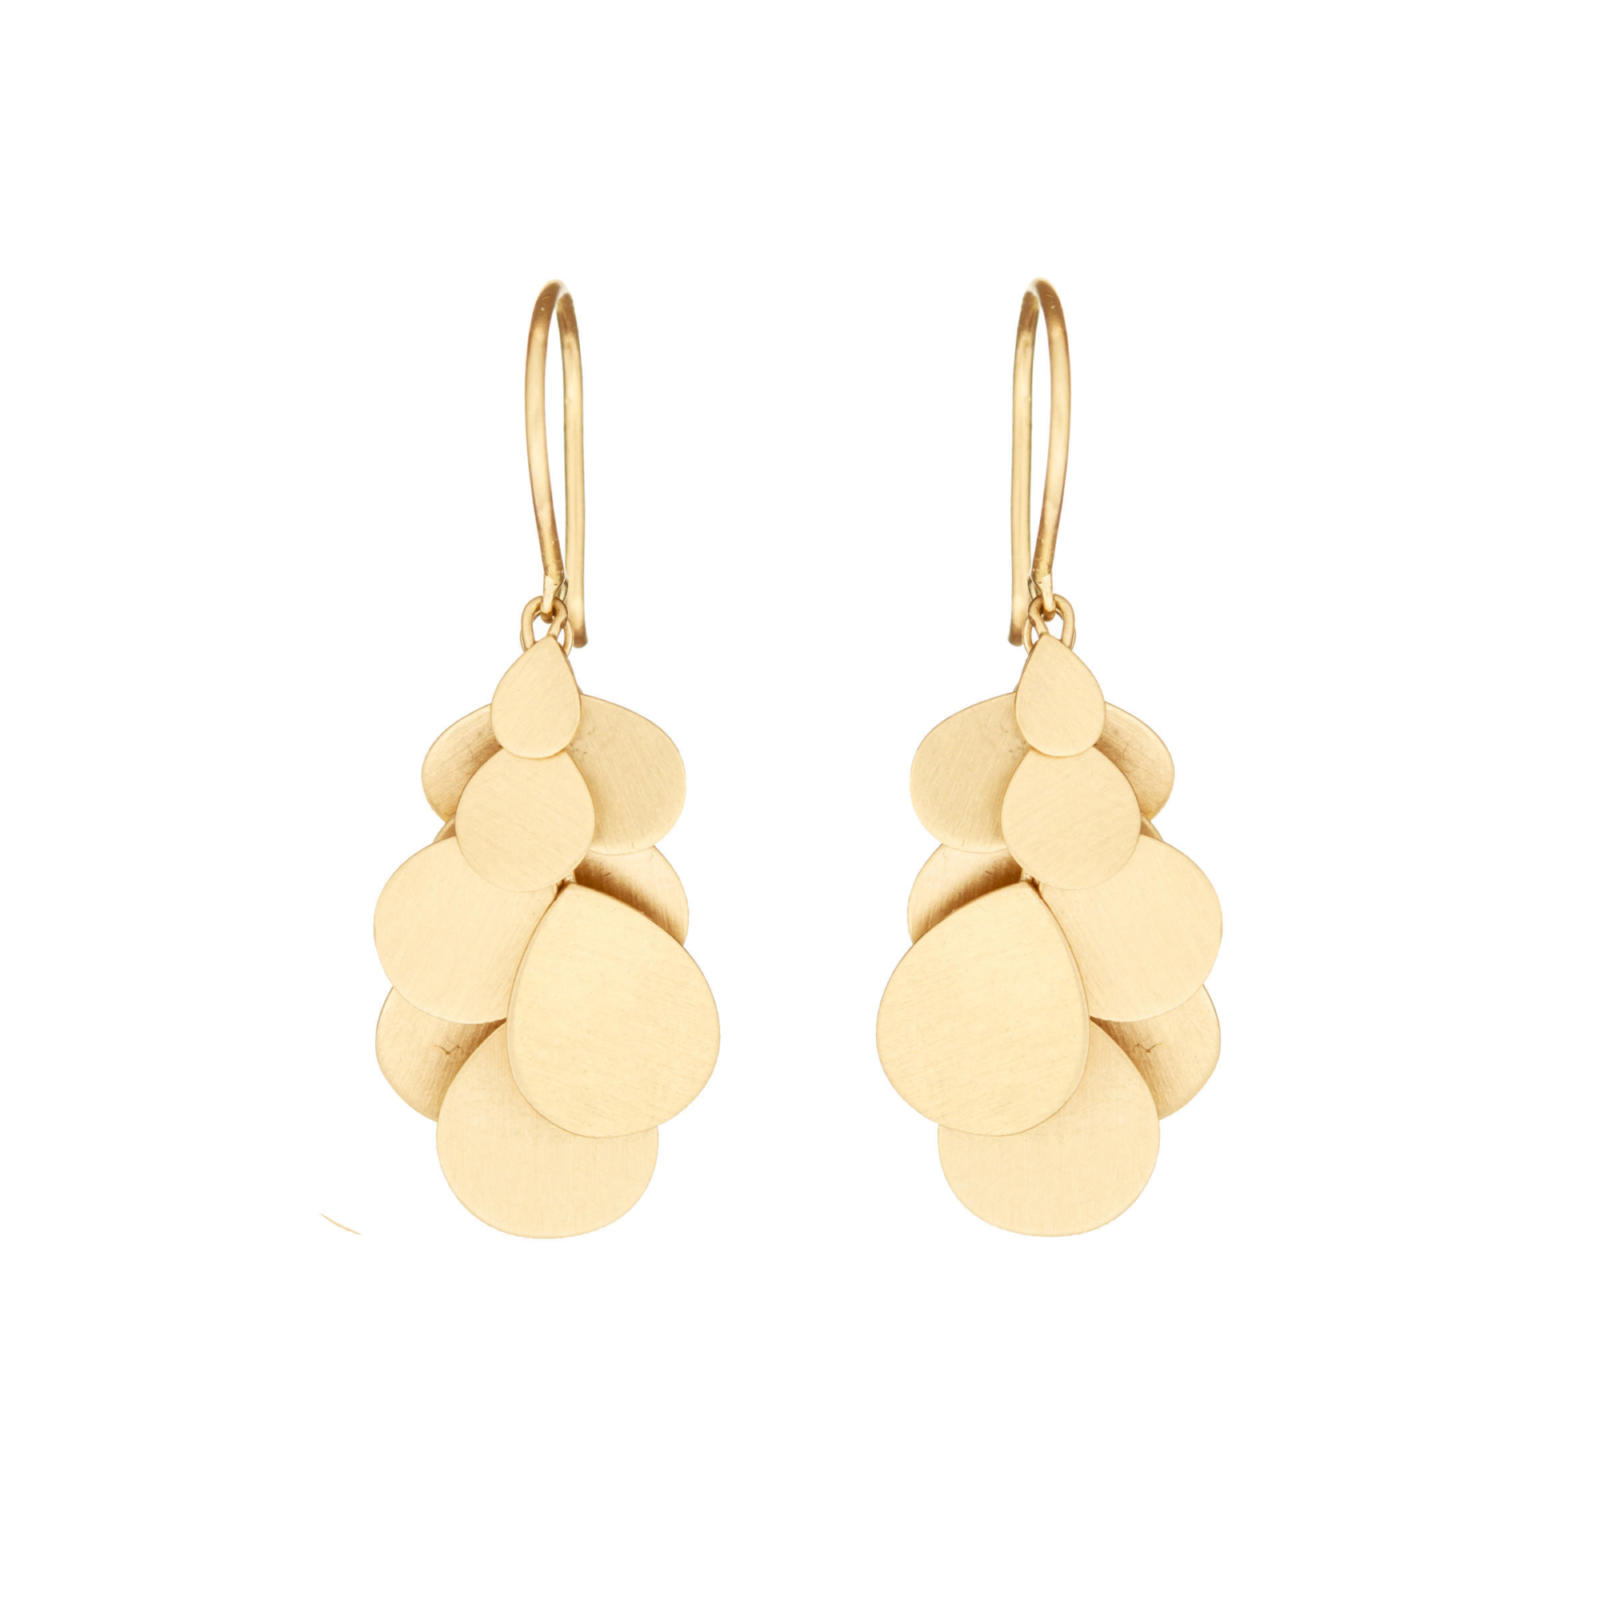 Sia Taylor ME11 Y Yellow Gold Earrings WB